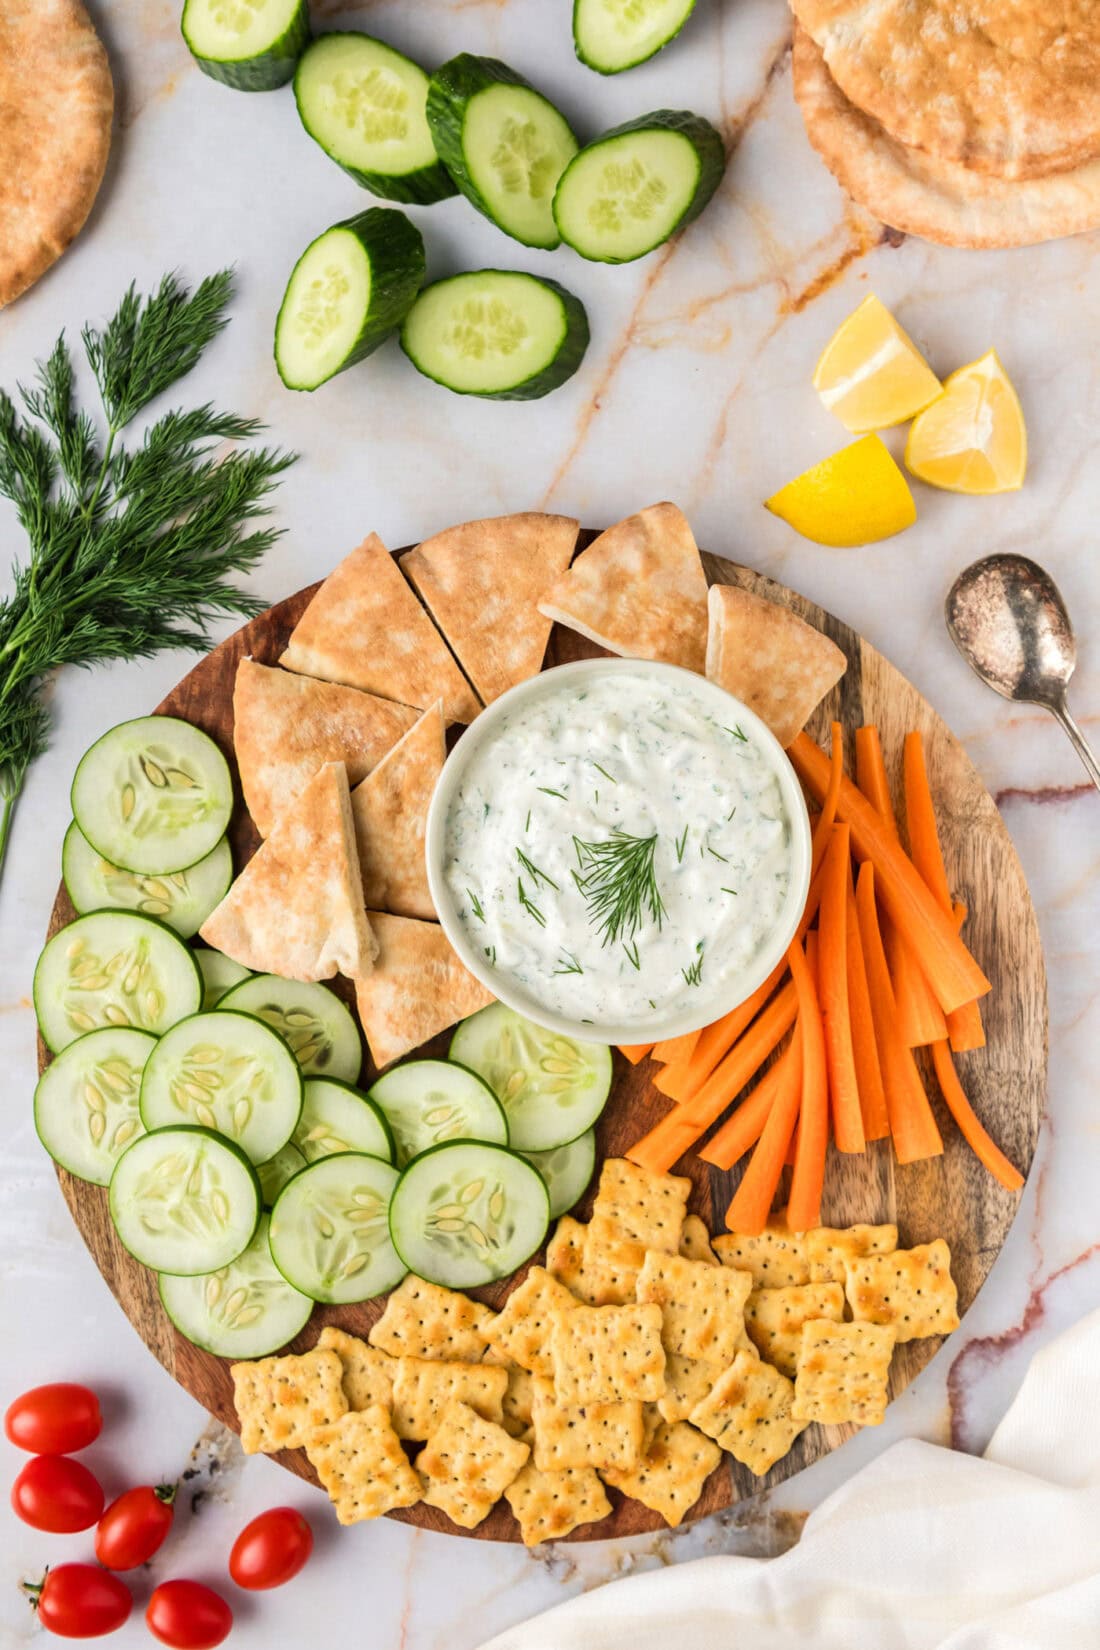 Tzatziki Sauce in a bowl on a platter with pita bread, crackers, carrots and cucumbers 